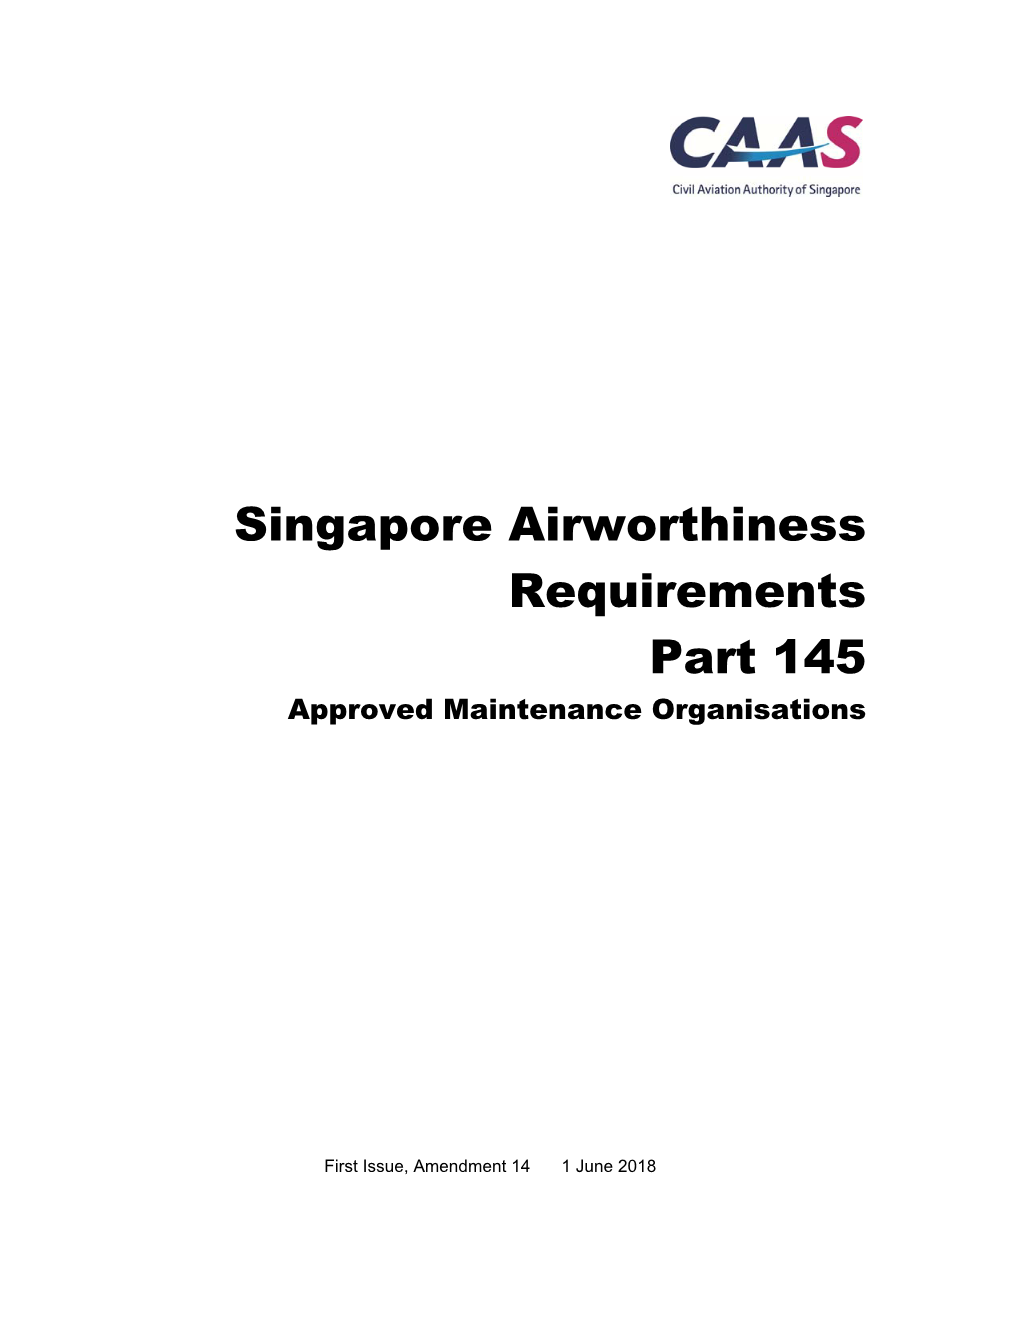 Singapore Airworthiness Requirements Part 145 Approved Maintenance Organisations